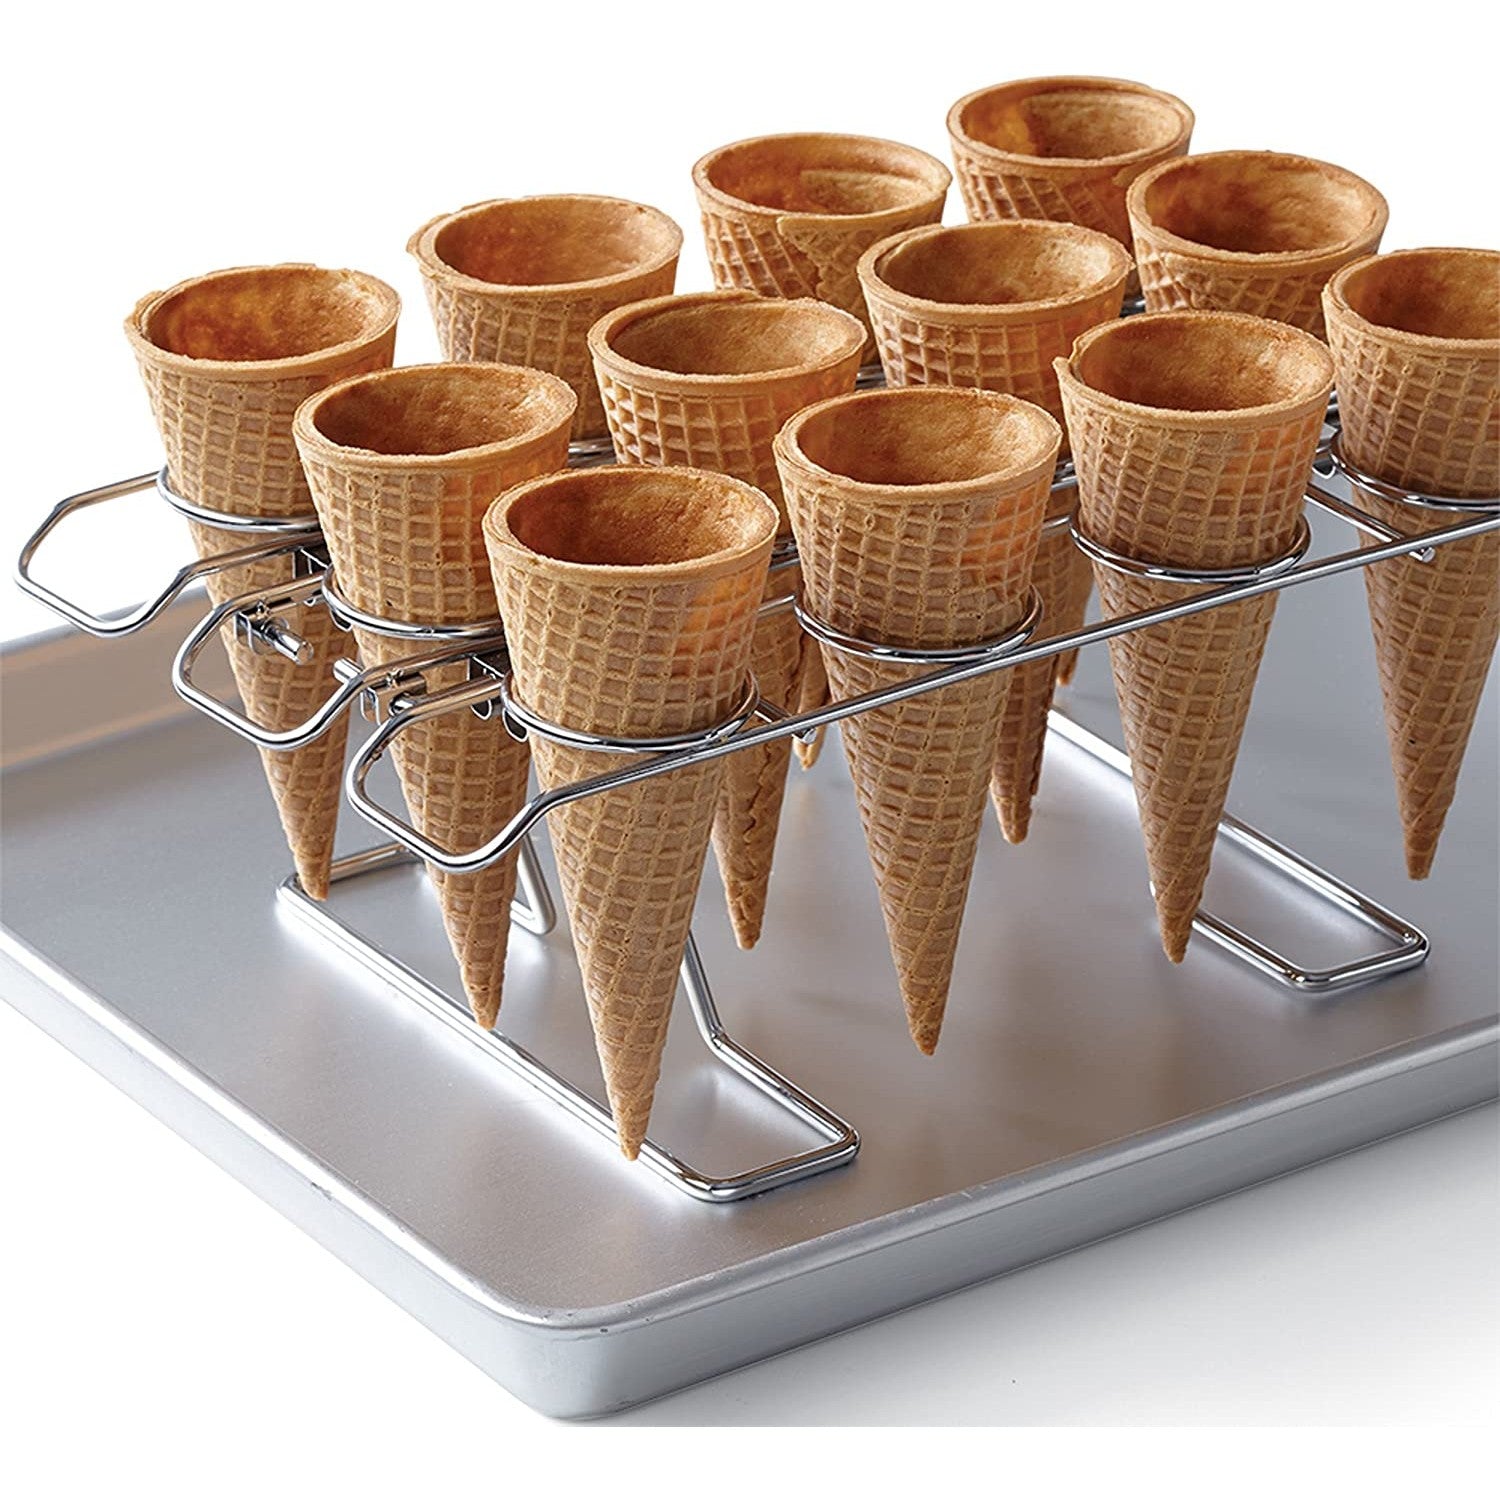 A cupcake cone baking rack holding empty ice cream cones ready to be filled.